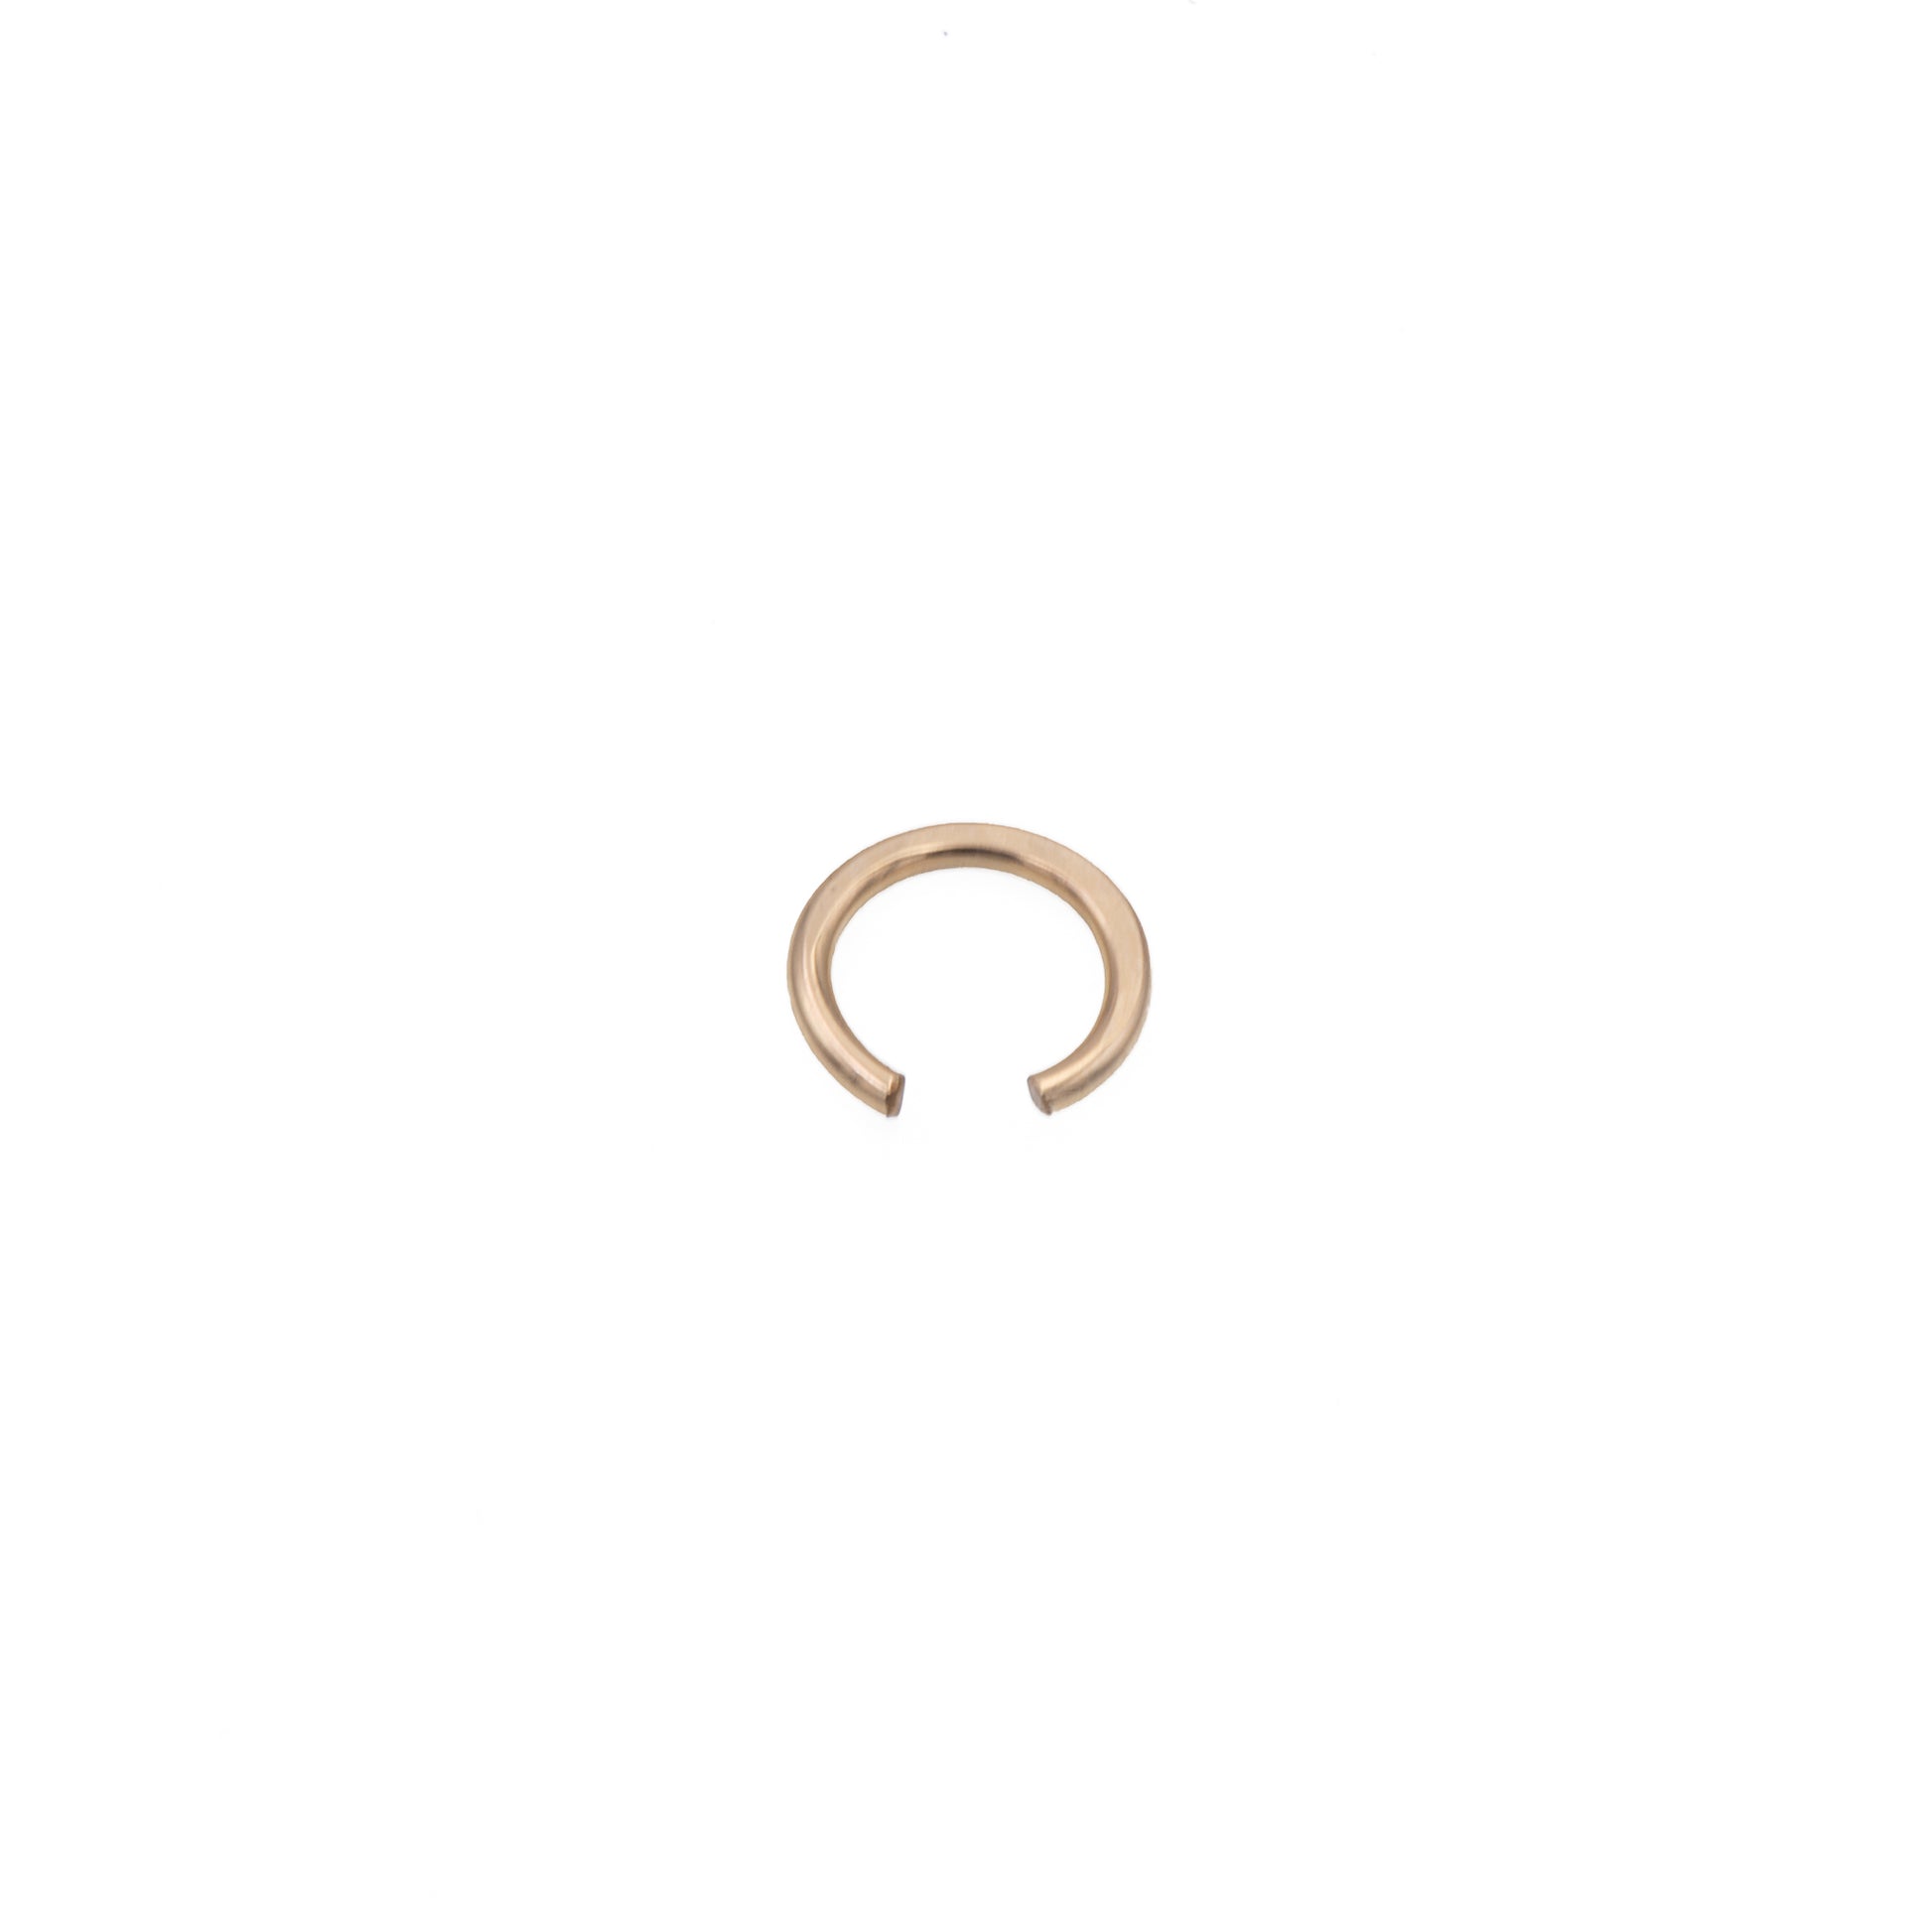 Zurina Ketola simple ear cuff in 14K gold fill, viewed from above at a slight angle, on white background.